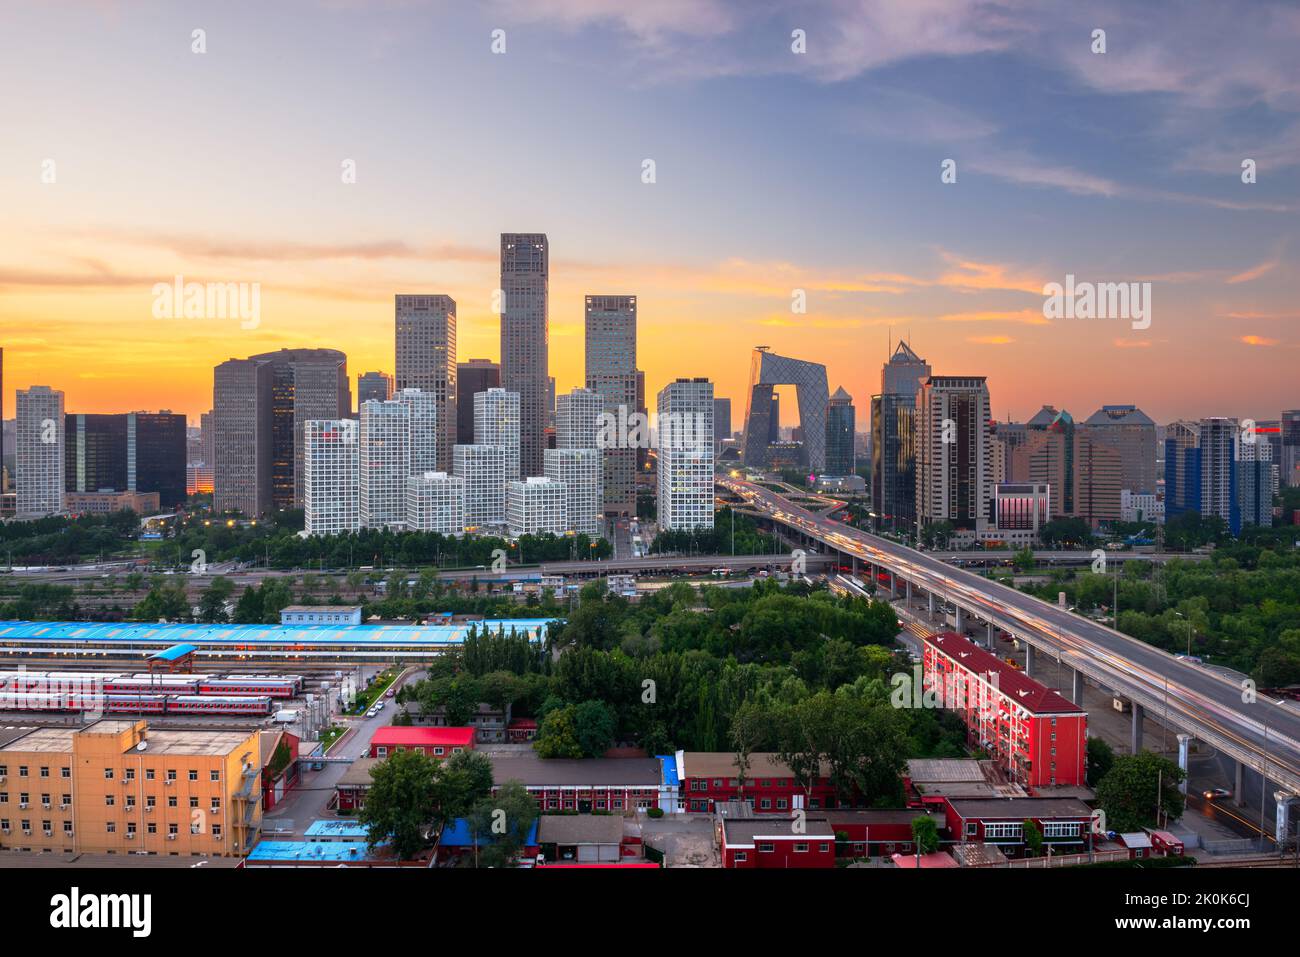 Beijing, China overlooking the central business district skyline at sunset. Stock Photo